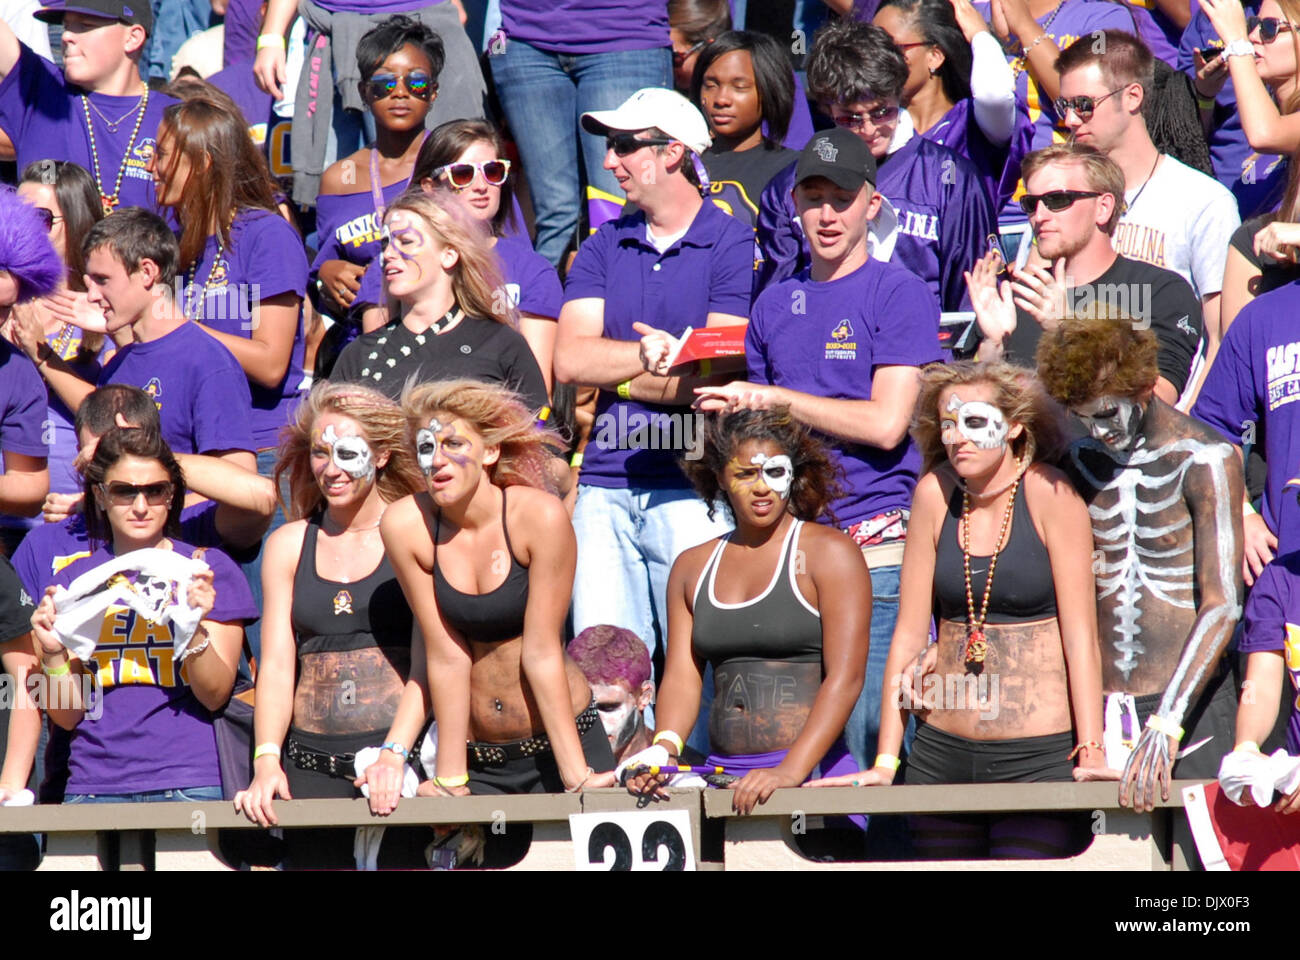 Oct. 16, 2010 - Greenville, North Carolina, United States of America - ECU  fans cheer their team during the game between the East Carolina Pirates and  the NC State Wolfpack at Dowdy-Ficklen